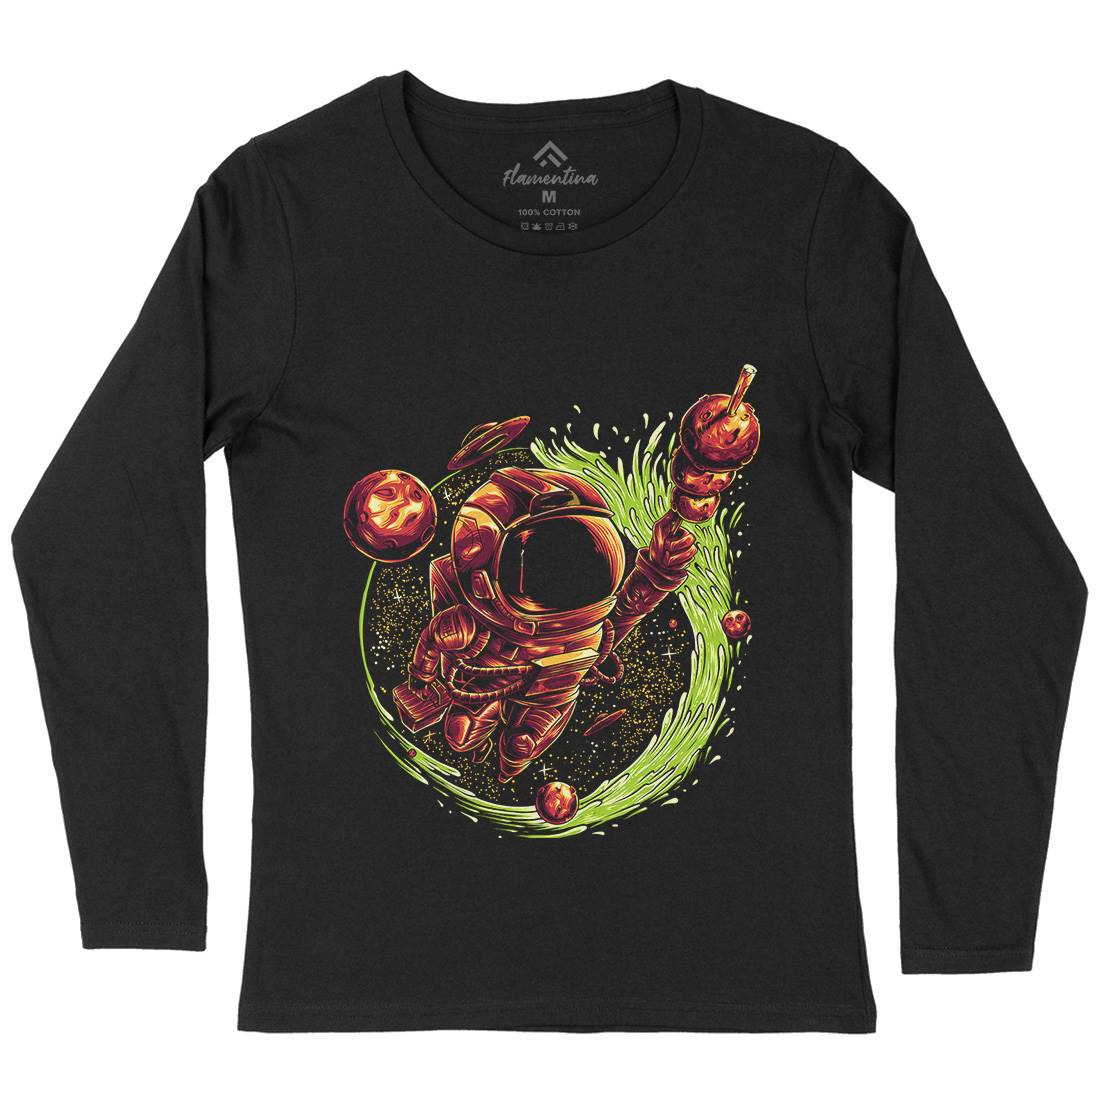 Grilled Meatball Womens Long Sleeve T-Shirt Space D037